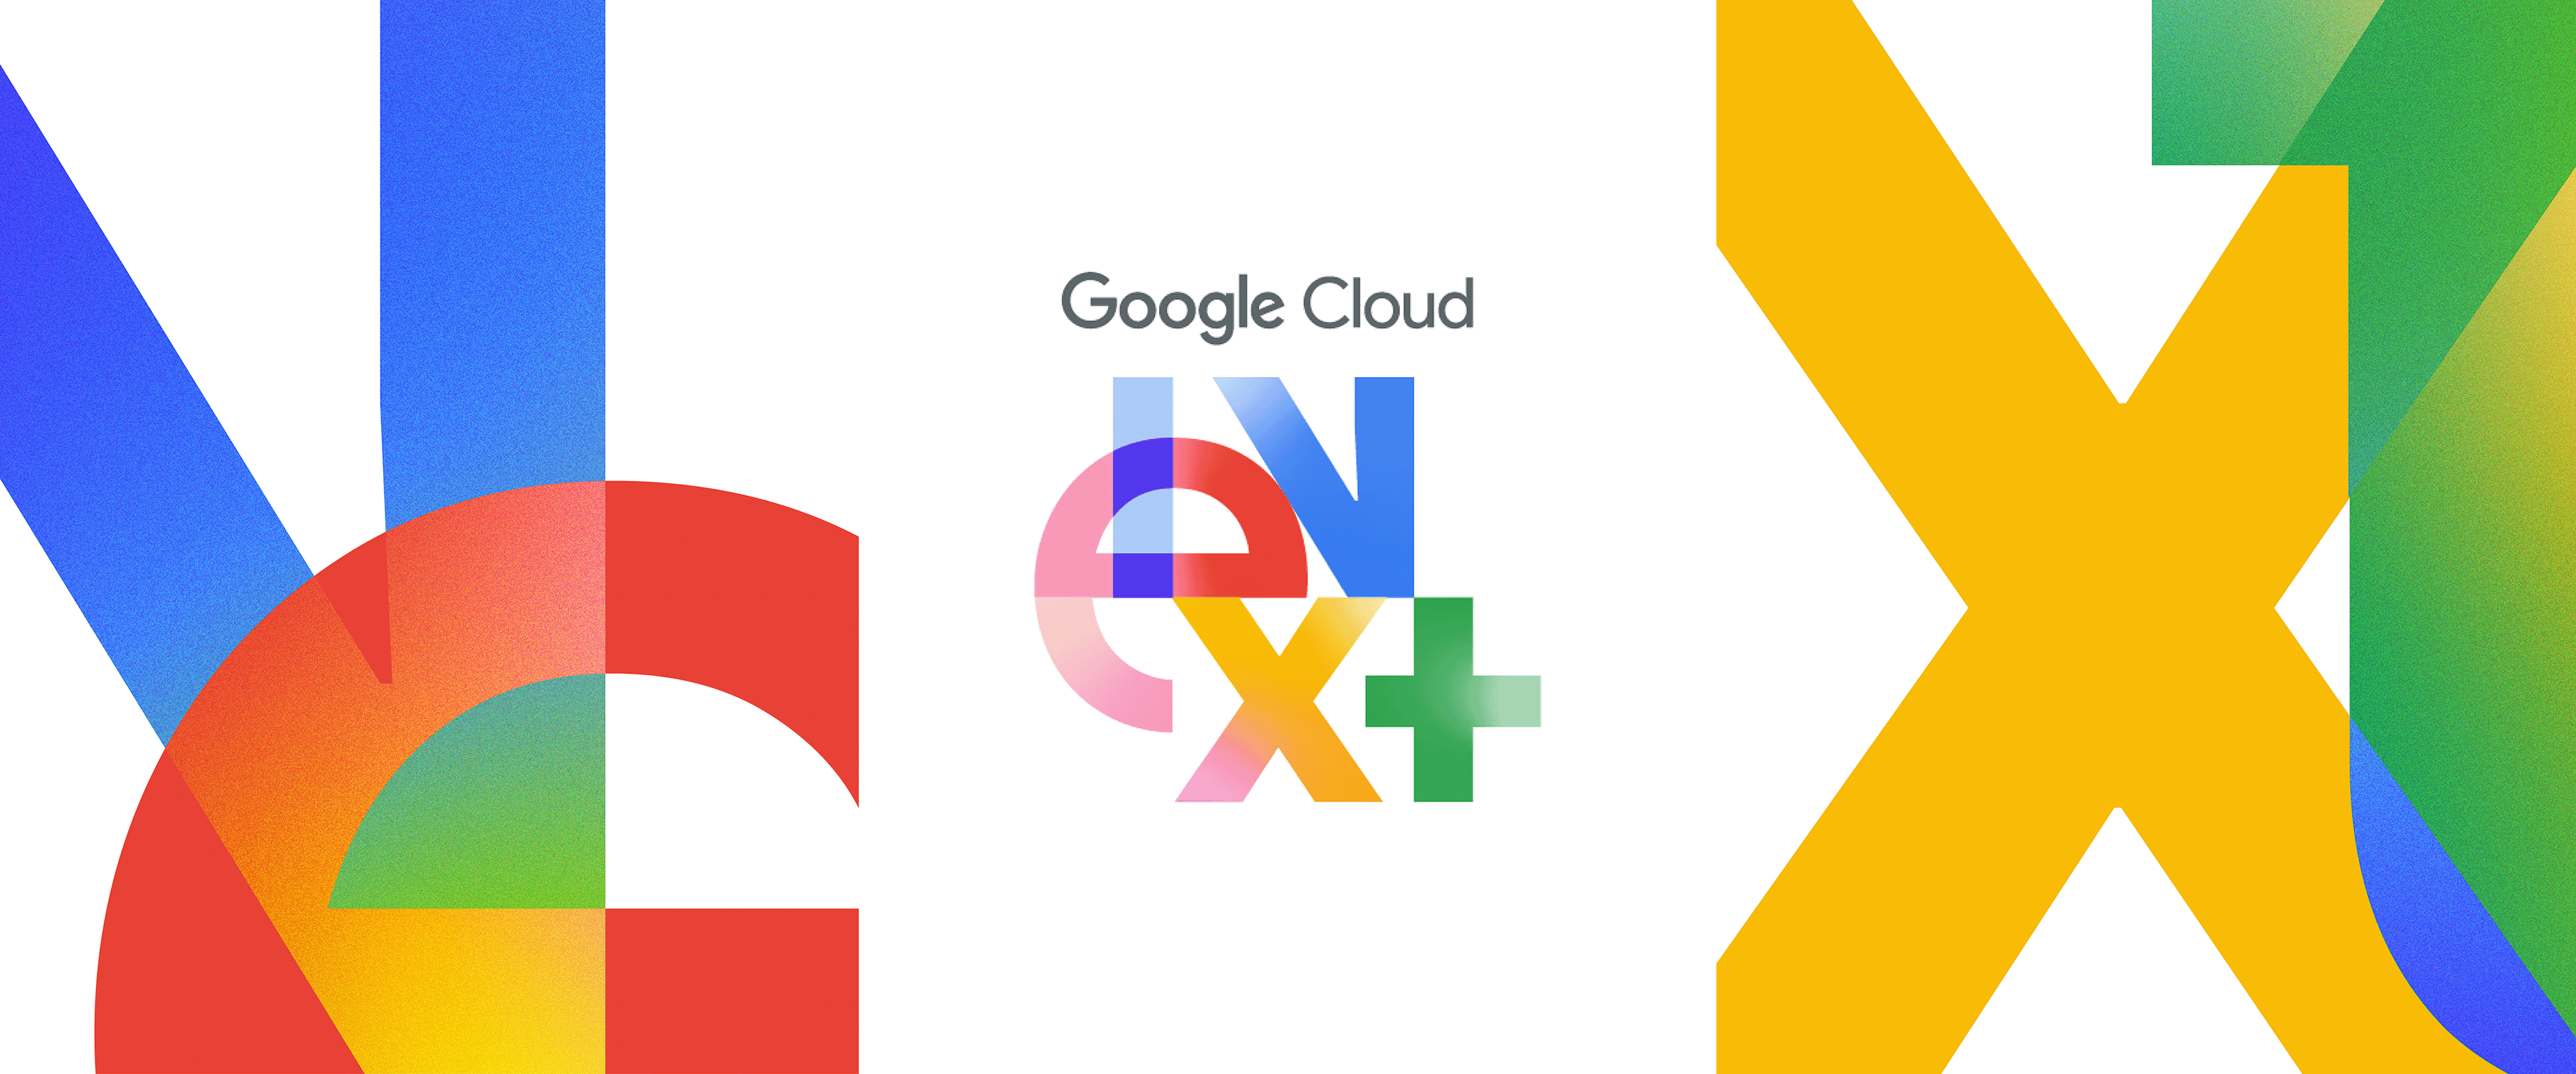 Colorful graphic that says “Google Cloud Next”